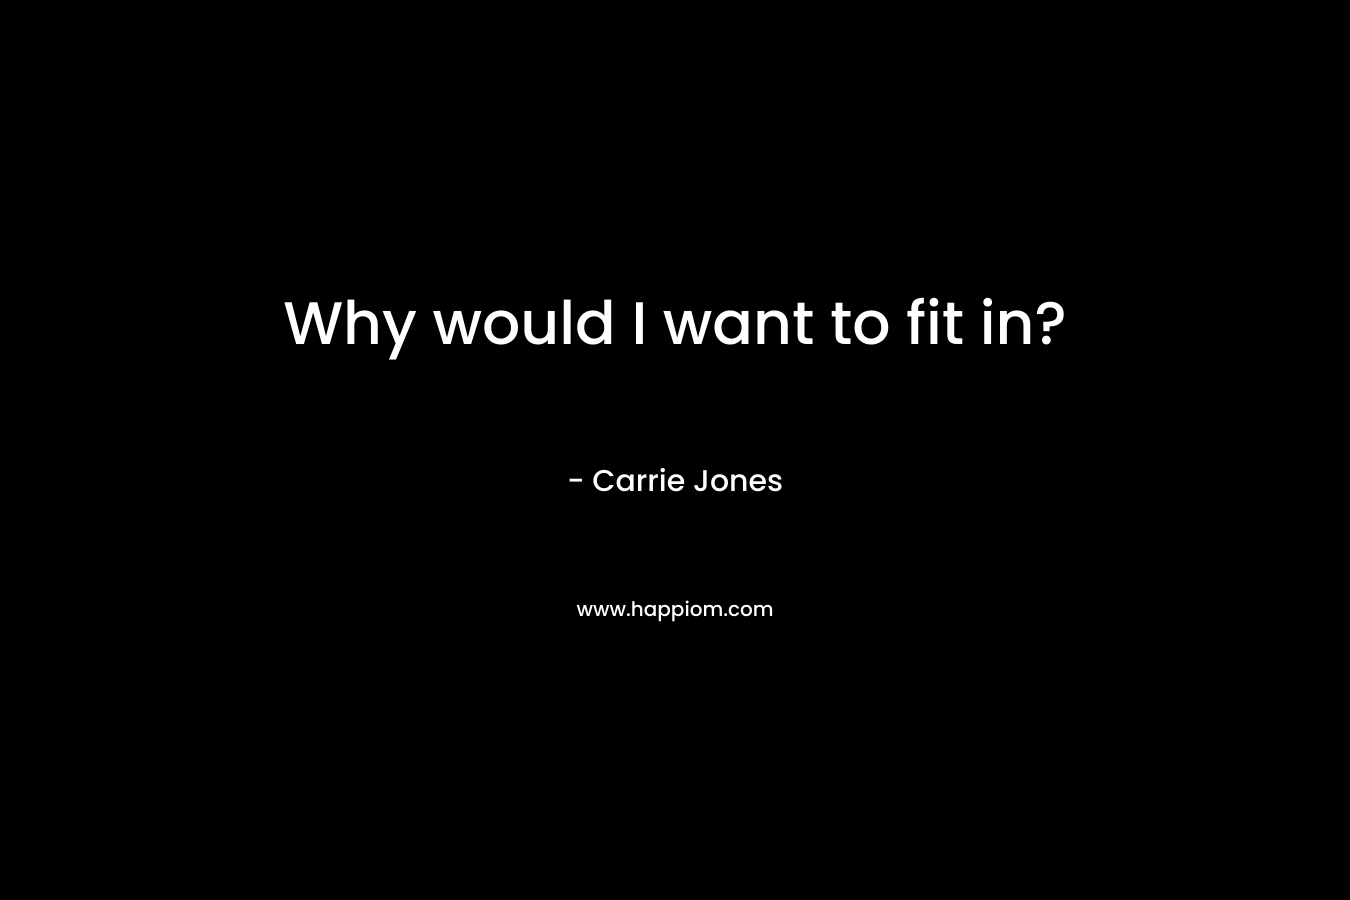 Why would I want to fit in? – Carrie Jones